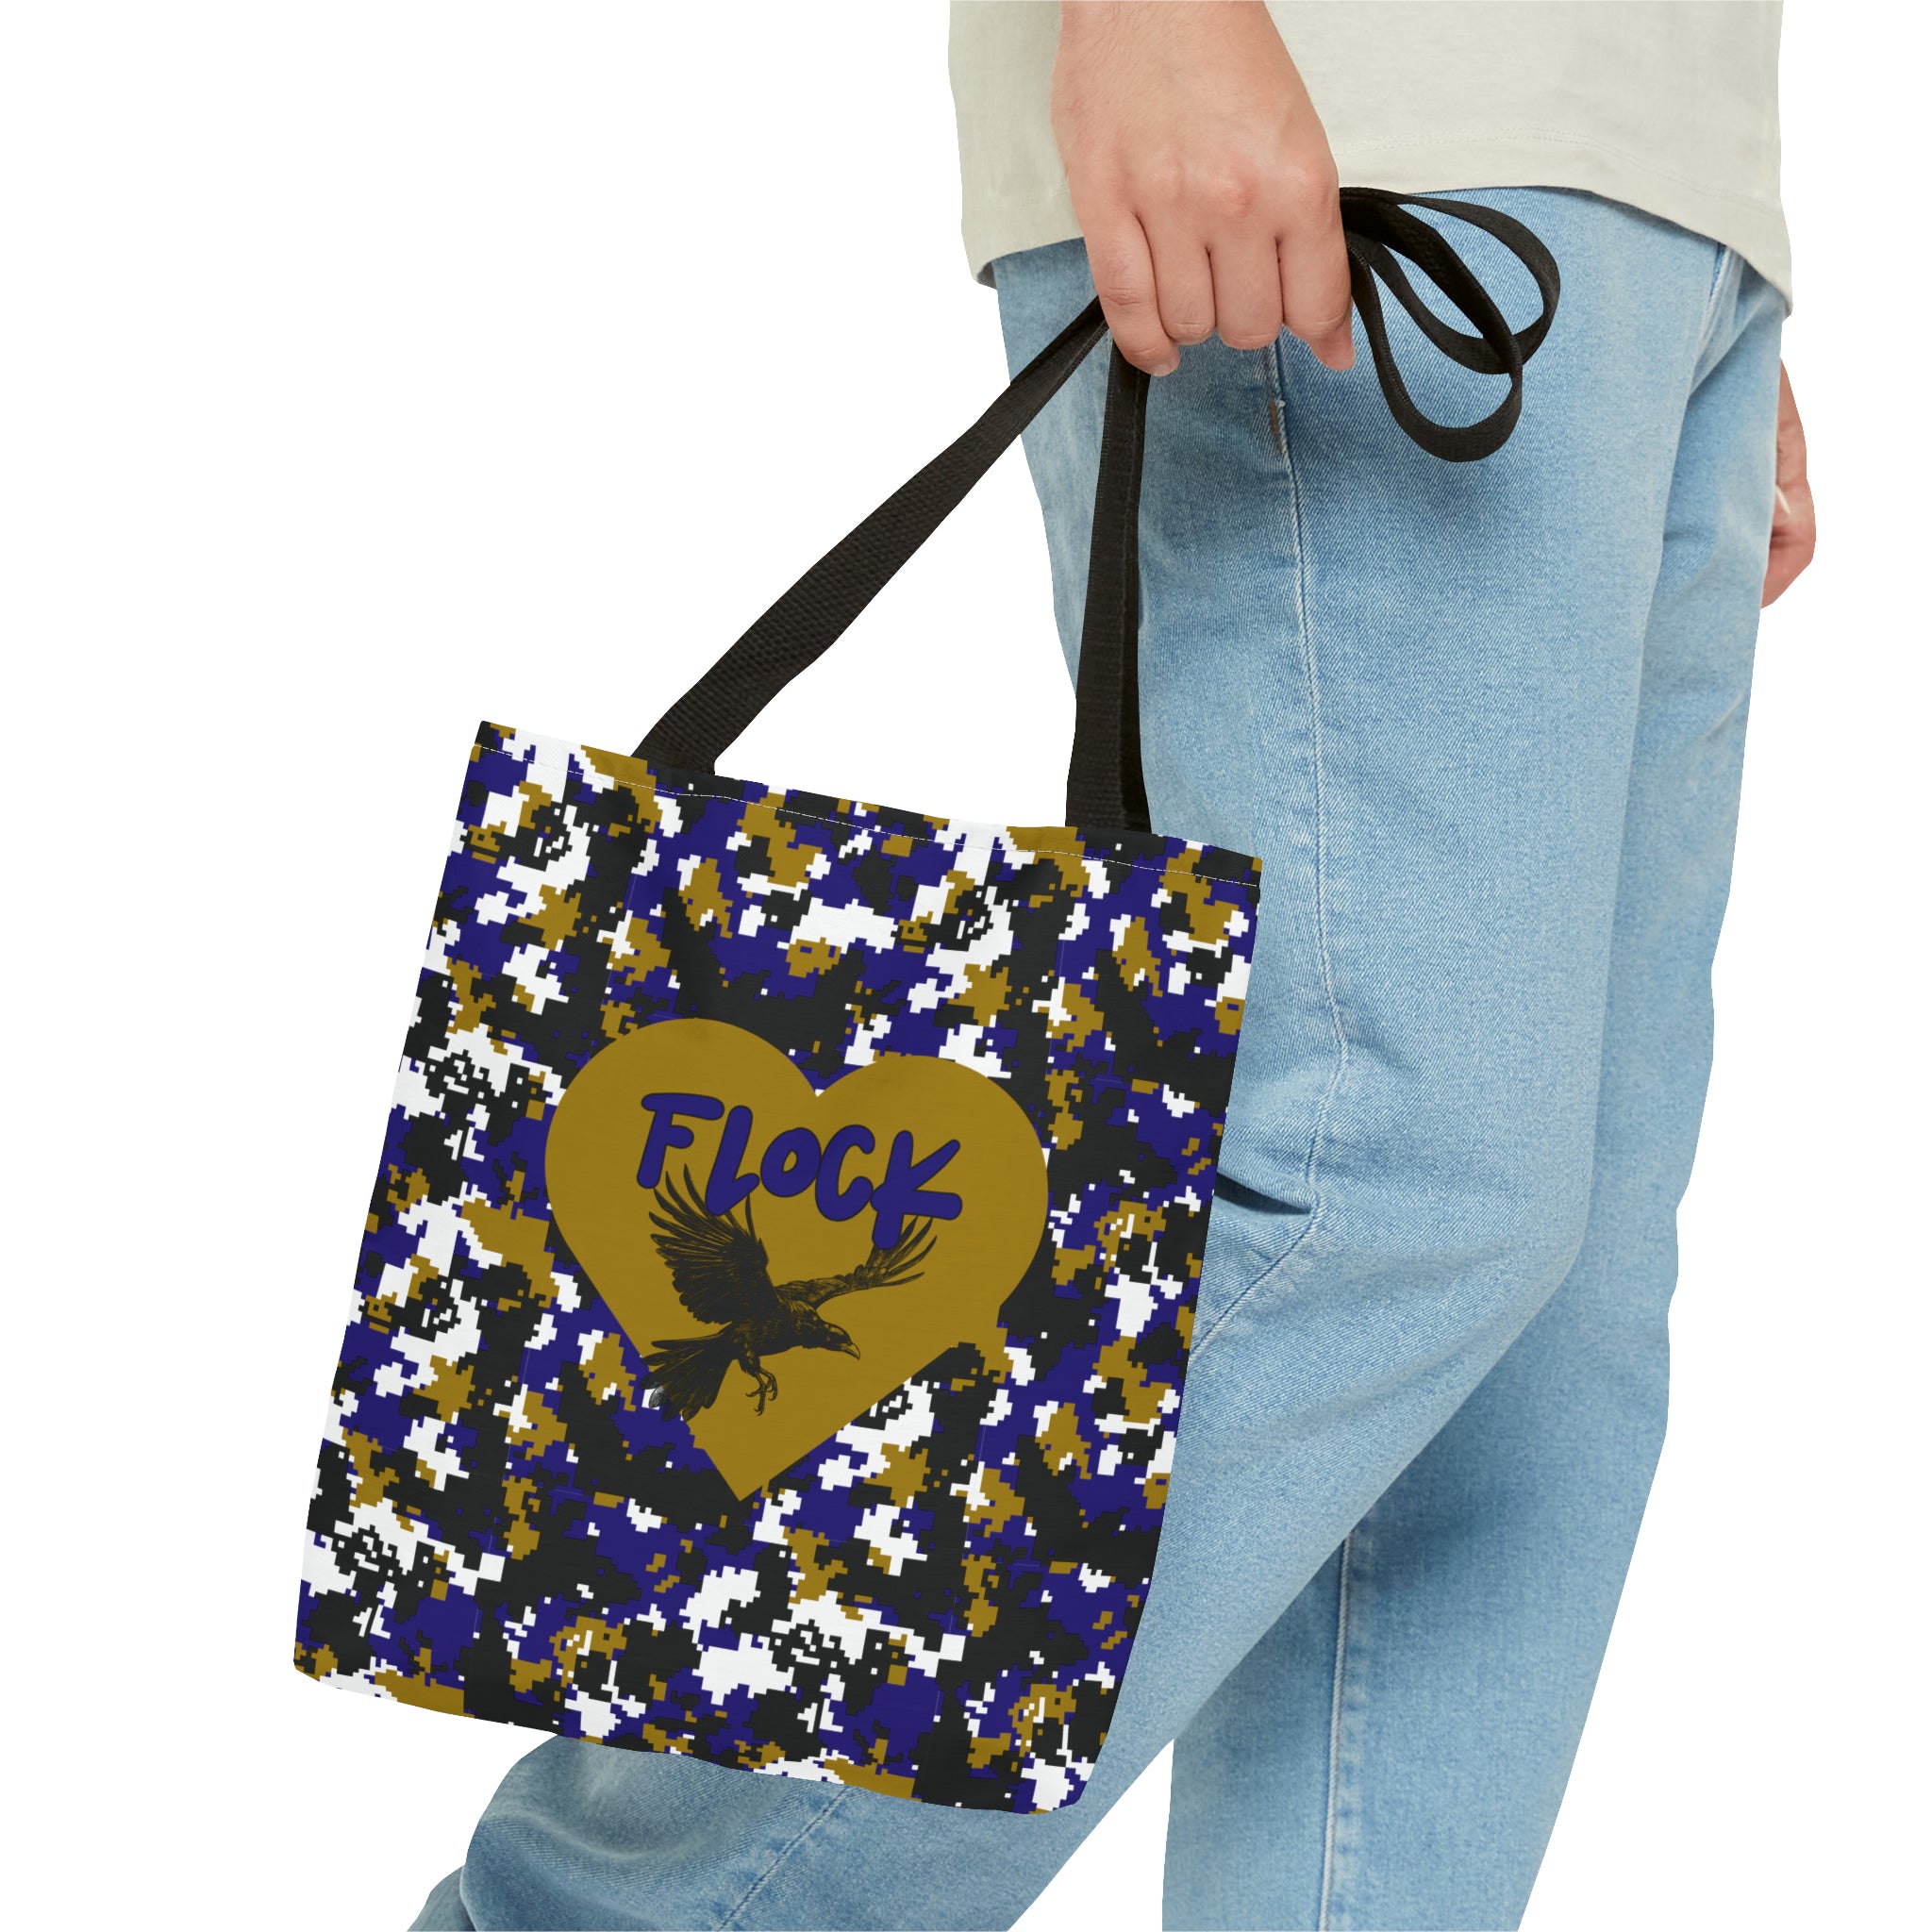 The Flock Tote | Purple Pride Camo Flock Shopping Tote for Baltimore Football Fans